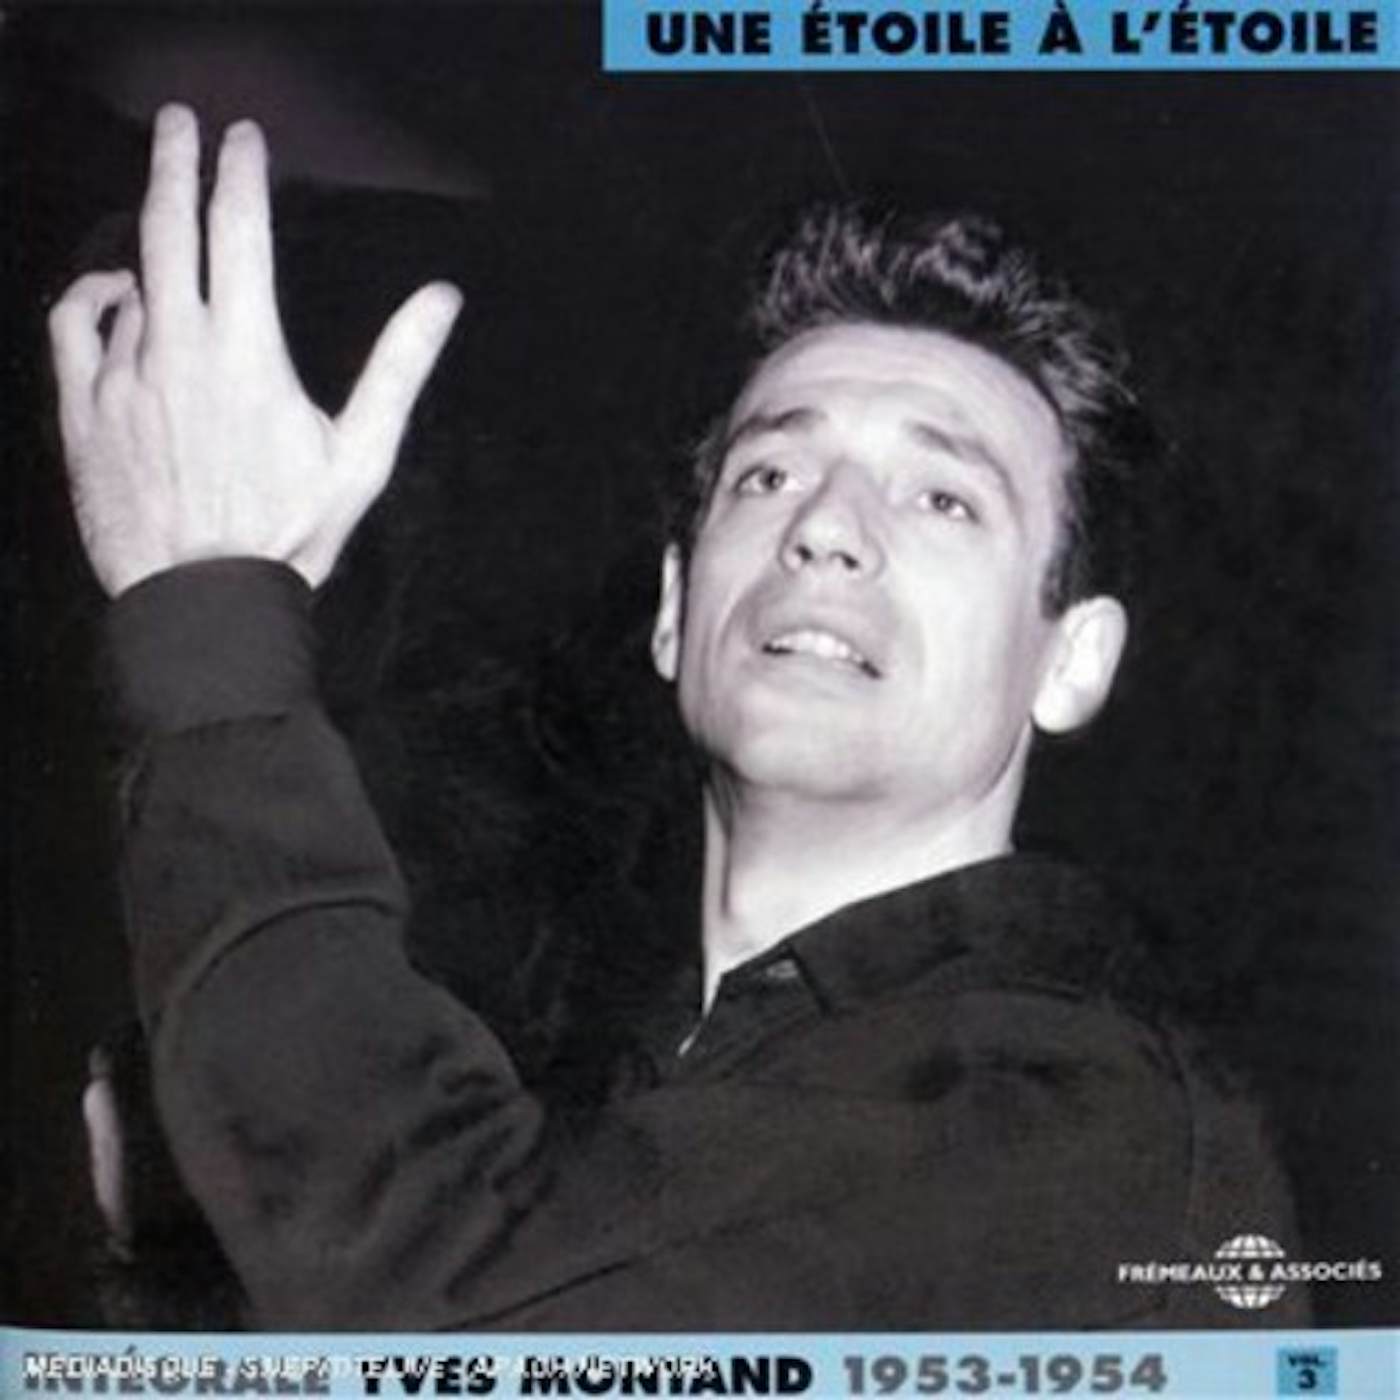 COMPLETE YVES MONTAND 3: UNE ETOILE A L'ETOILE CD